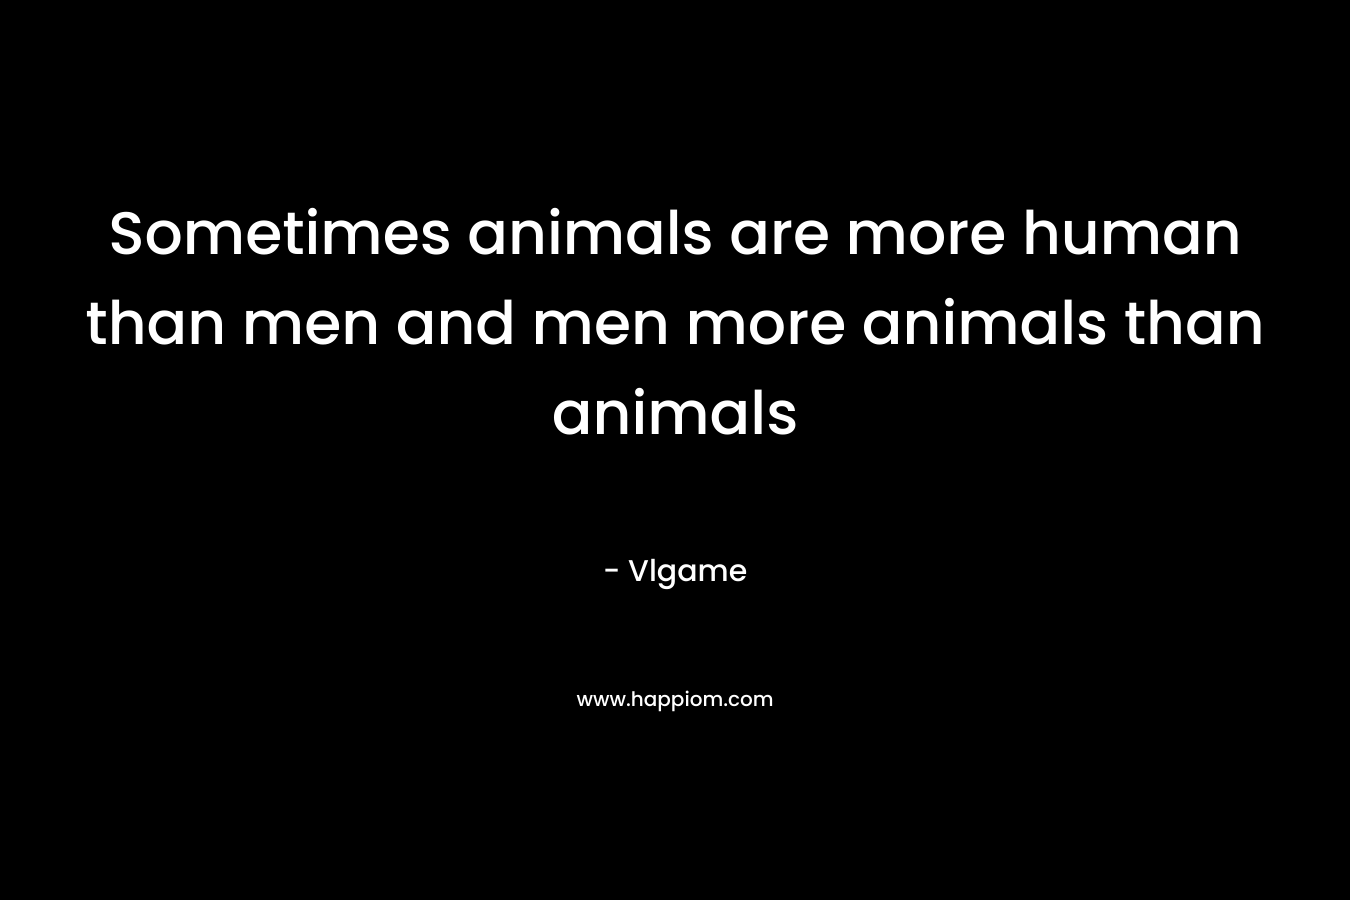 Sometimes animals are more human than men and men more animals than animals